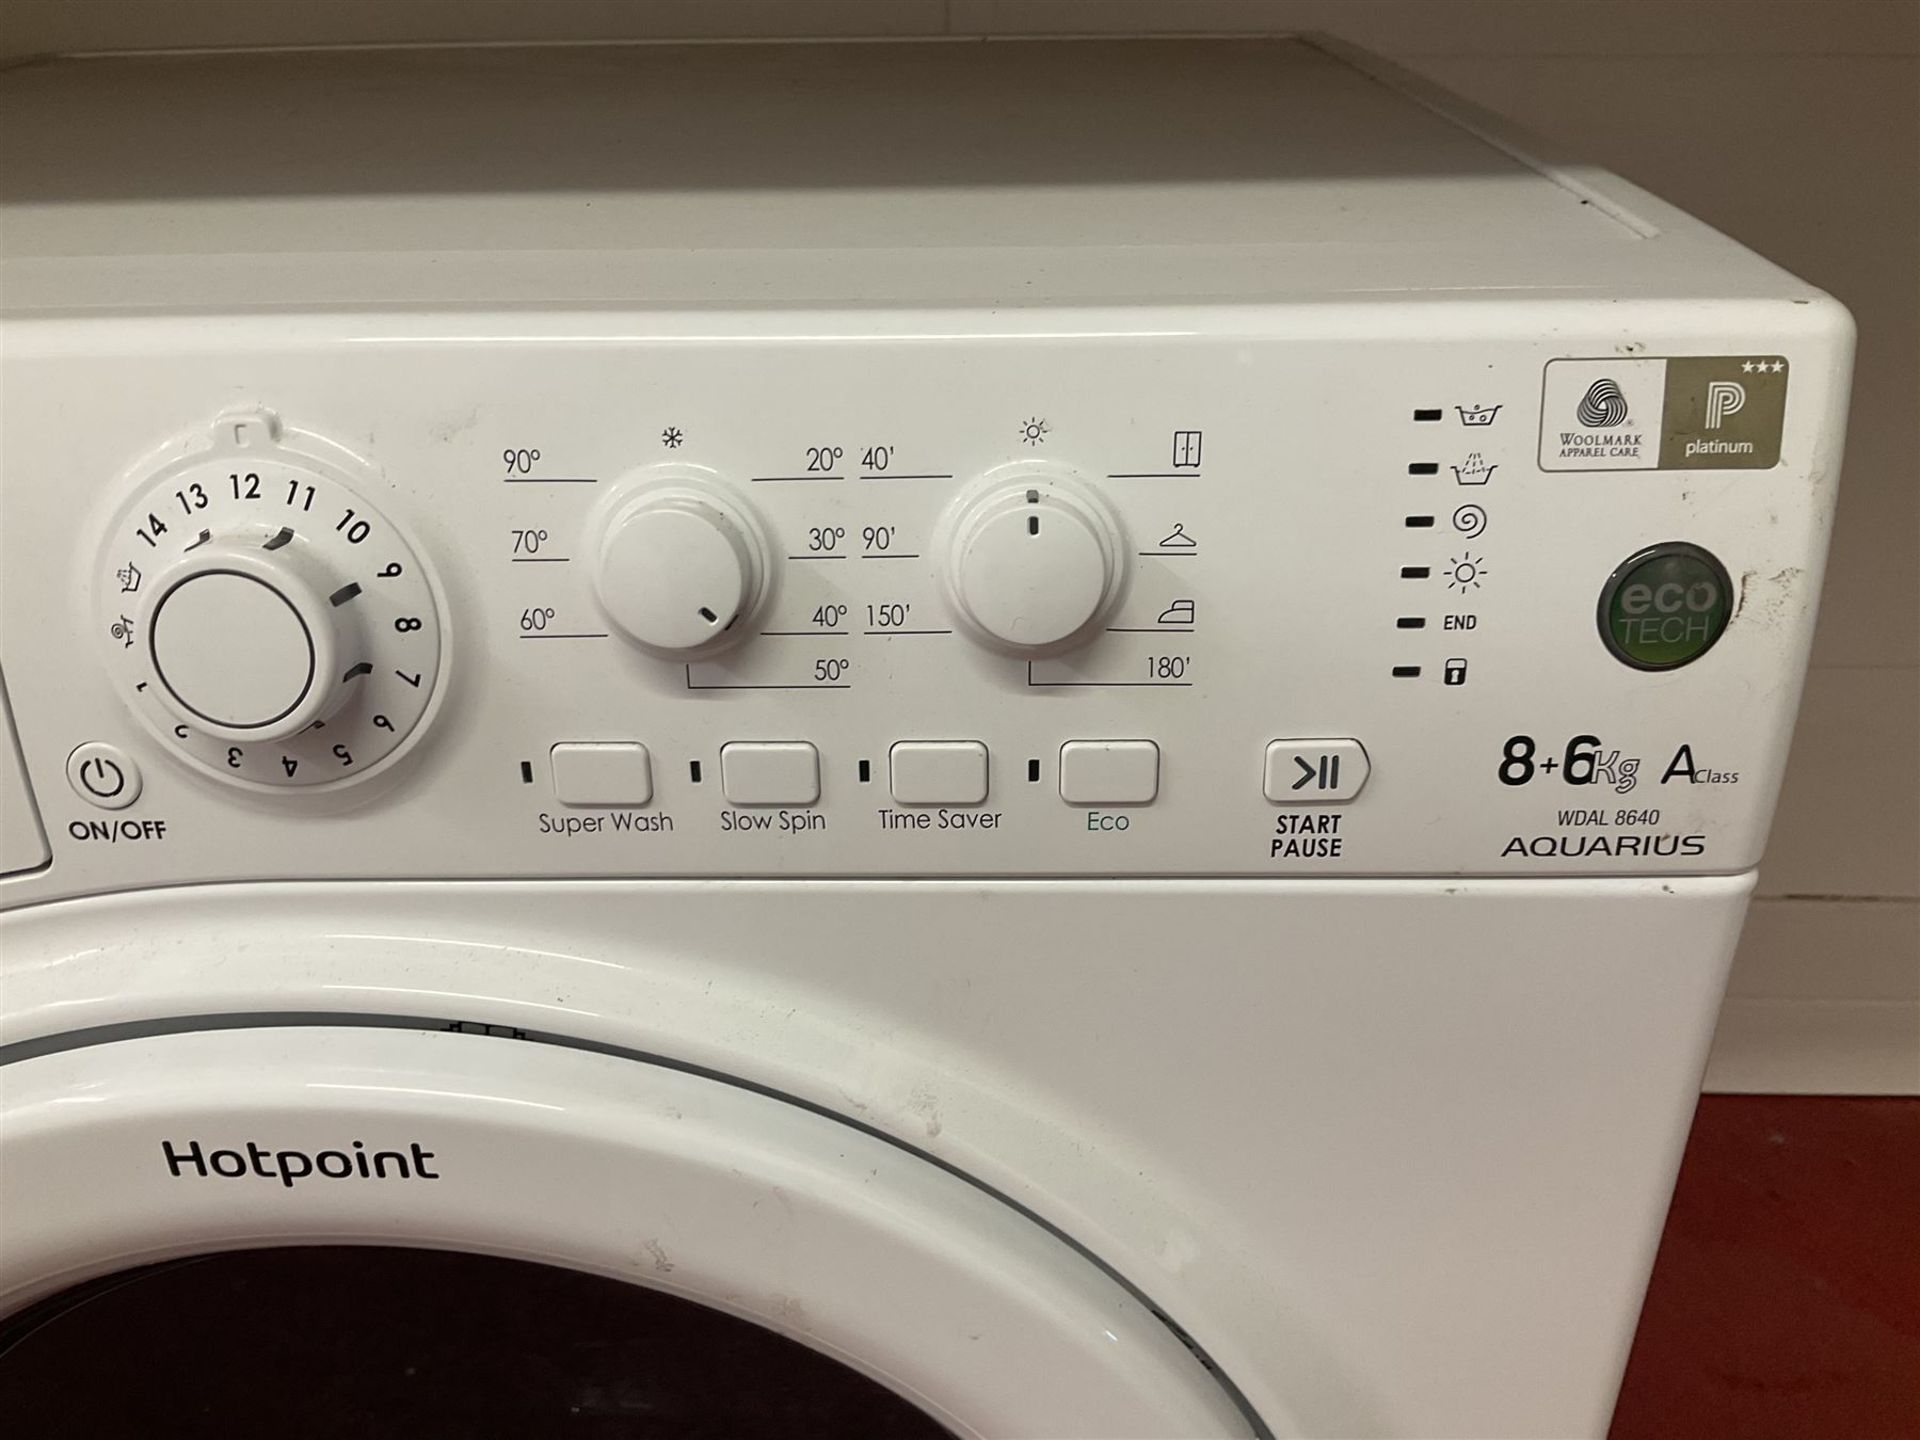 Hotpoint Aquarius 8kg washer dryer WDAL8640- LOT SUBJECT TO VAT ON THE HAMMER PRICE - To be - Image 2 of 5